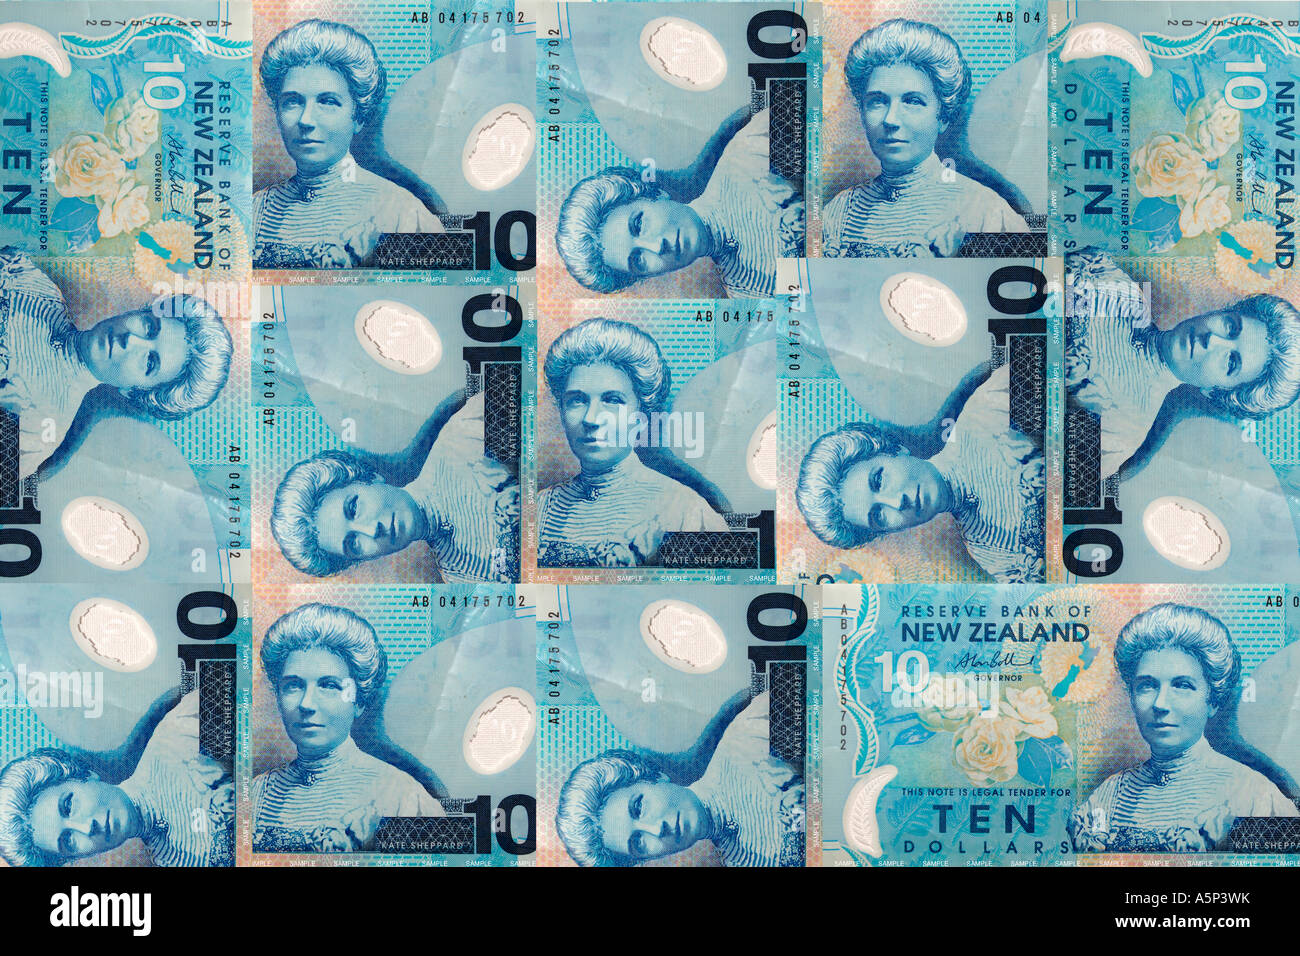 A collage of Kate Sheppard on the New Zealand 10 dollar notes. Stock Photo